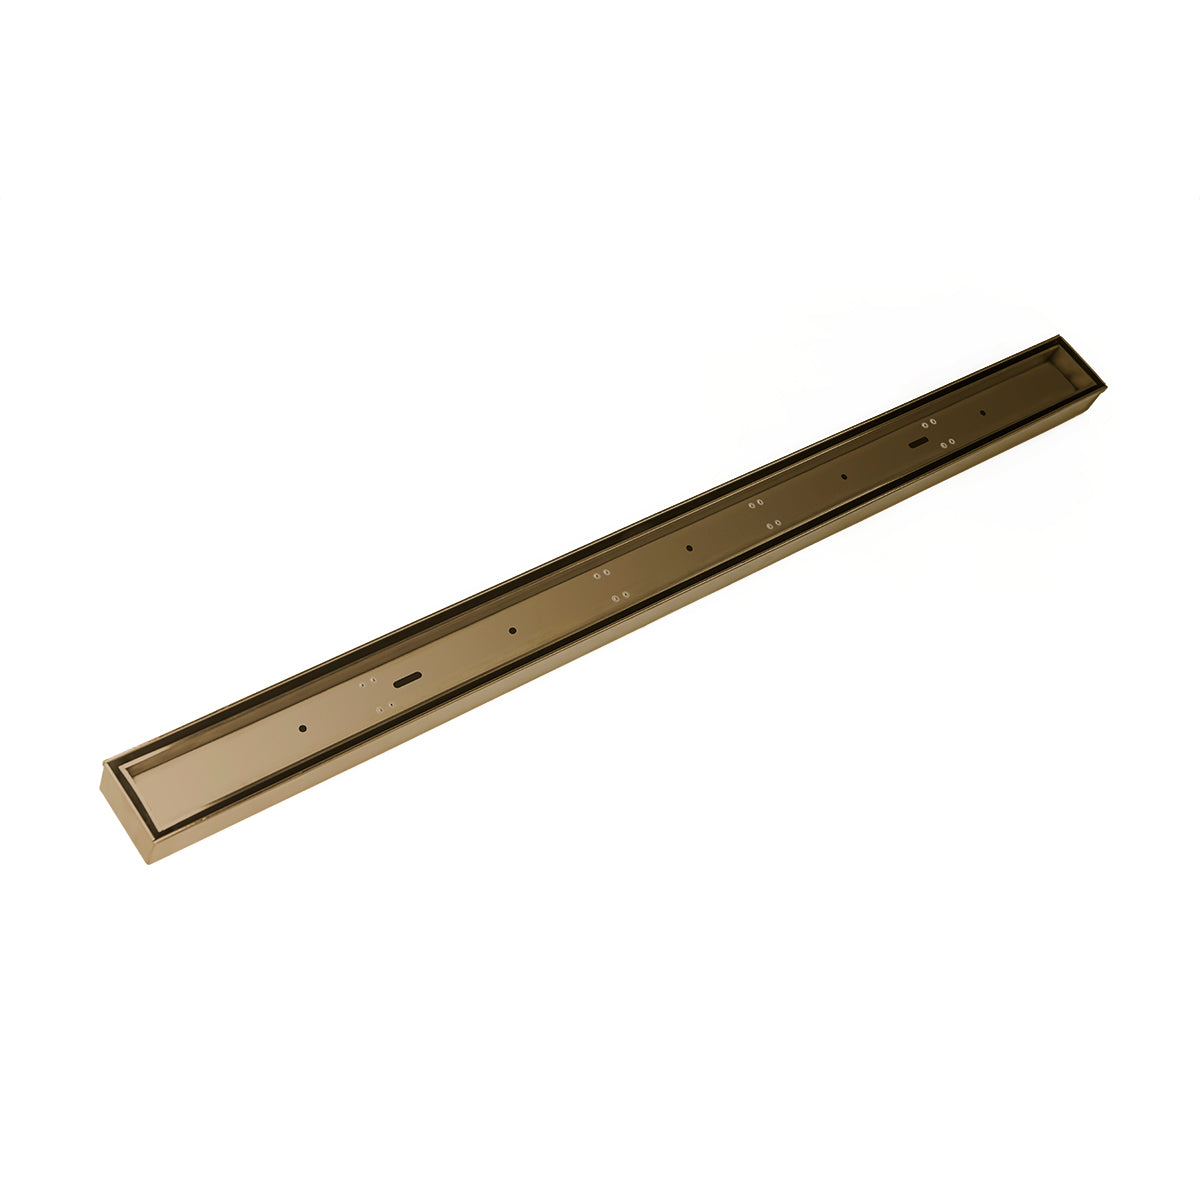 Infinity Drain 24" FX Low Profile Series Fixed Length Linear Drain Kit with Tile Insert Frame